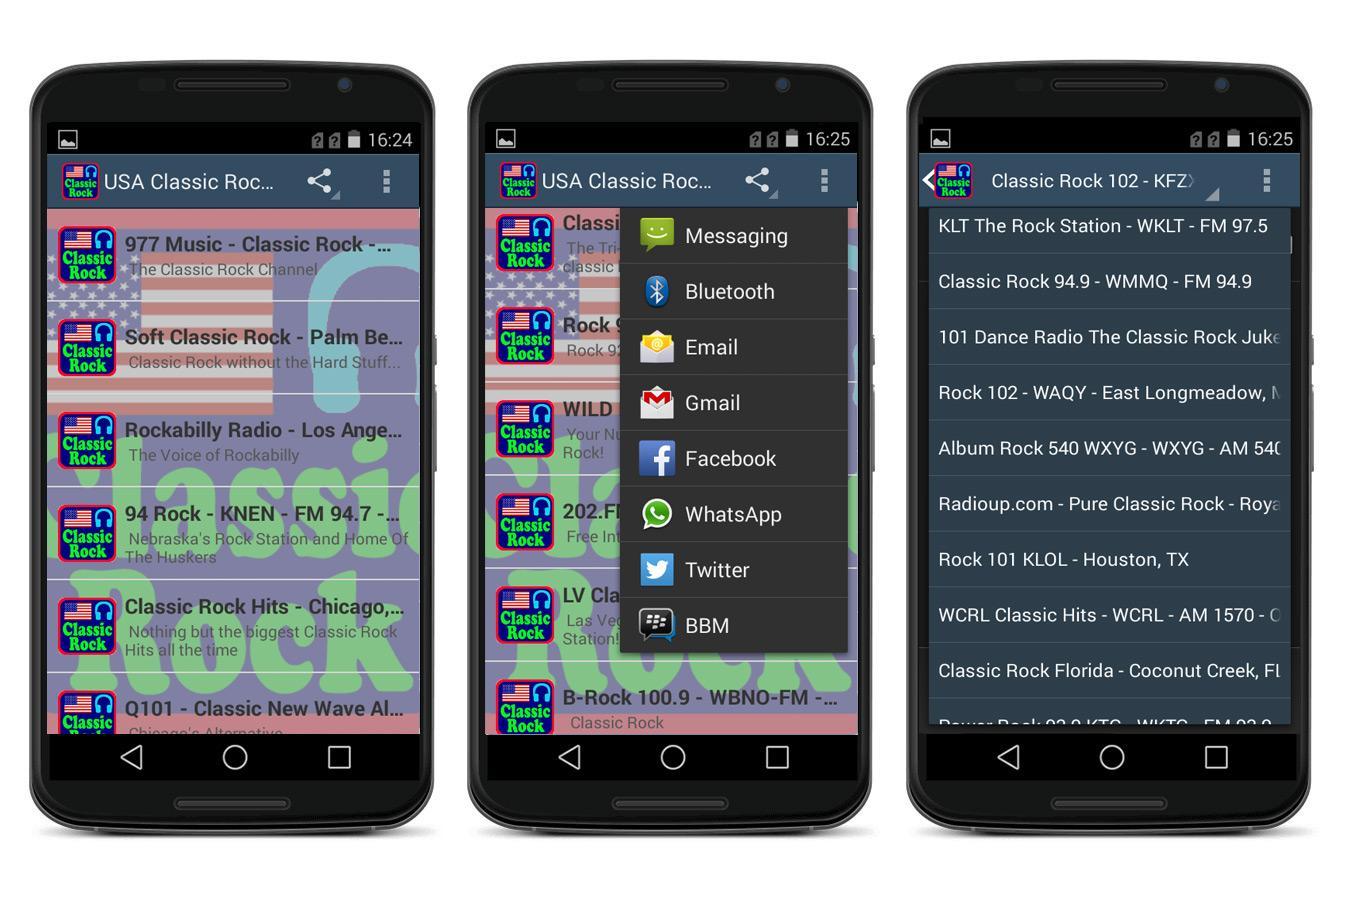 USA Classic Rock Radio Station for Android - APK Download